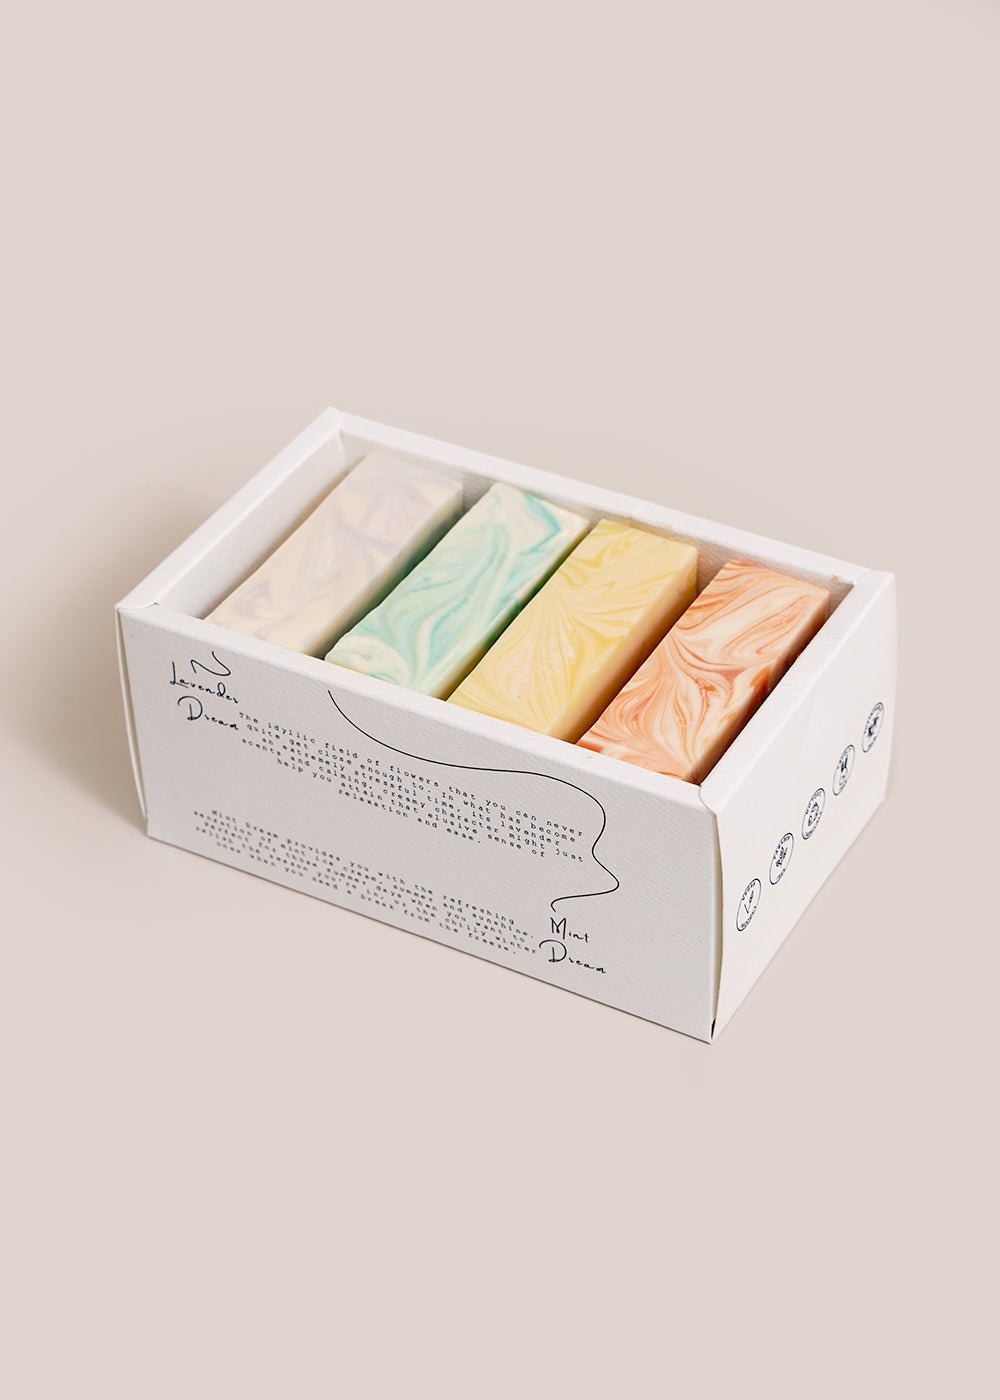 Soap So Co. Soap Dream Collection - New Classics Studios Sustainable Ethical Fashion Canada